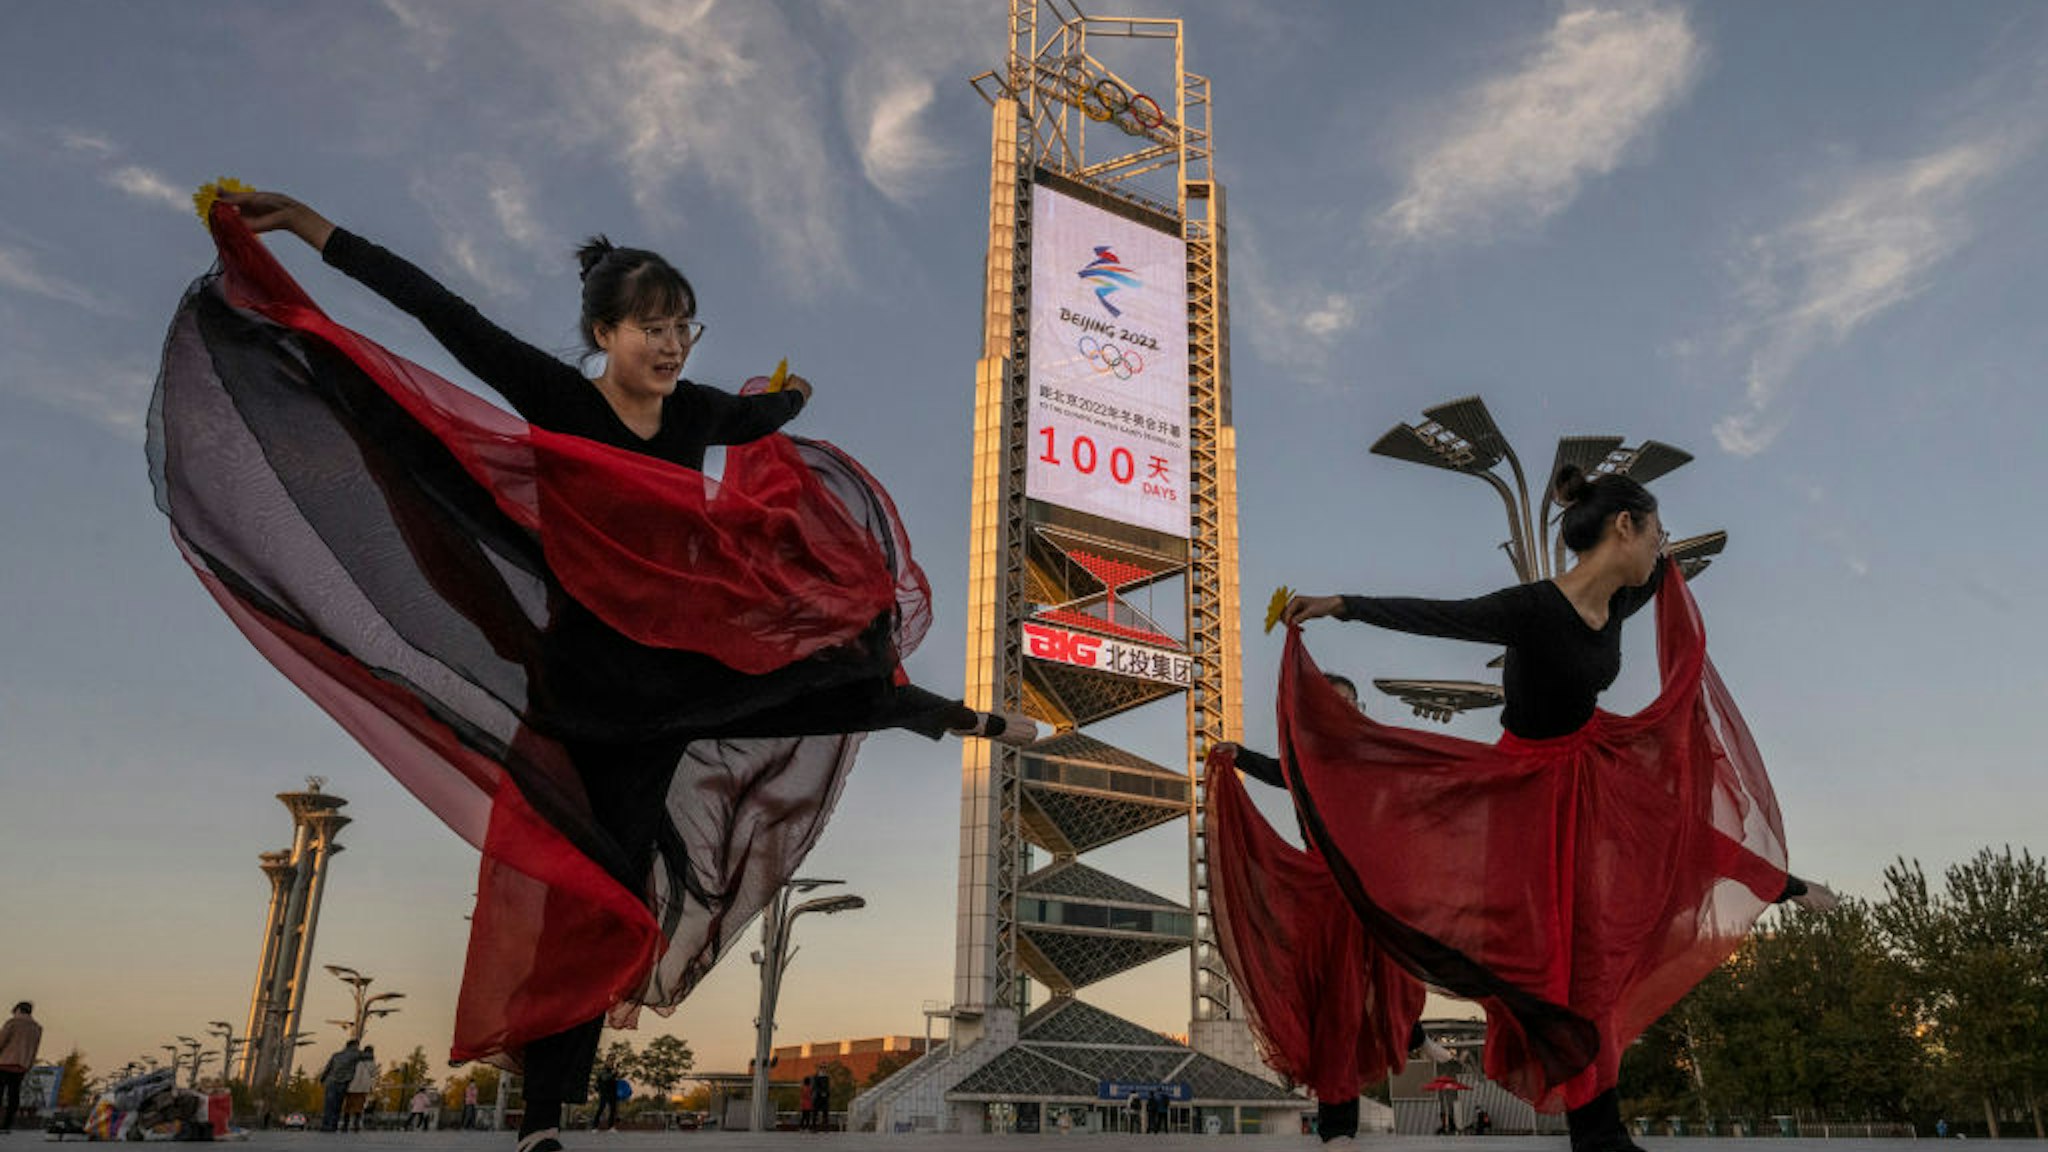 BEIJING, CHINA - OCTOBER 27: Women practice a dance routine in front of a large countdown screen showing 100 days before the opening of the Beijing 2022 Winter Olympics at the Olympic Park on October 27, 2021 in Beijing, China. The games are set to open on February 4, 2022. (Photo by Kevin Frayer/Getty Images)